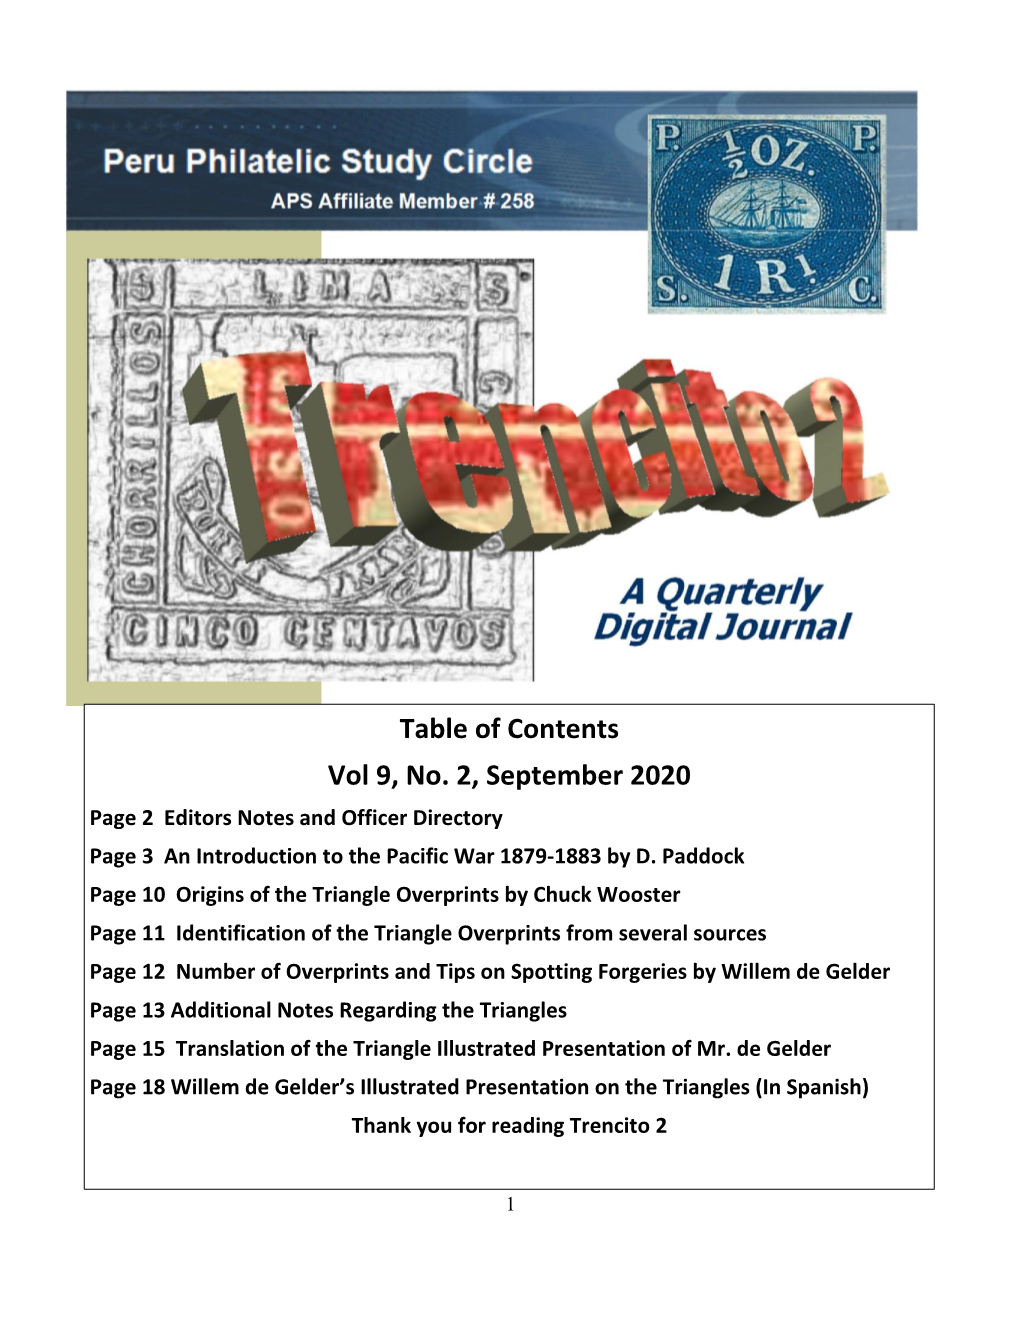 Table of Contents Vol 9, No. 2, September 2020 Page 2 Editors Notes and Officer Directory